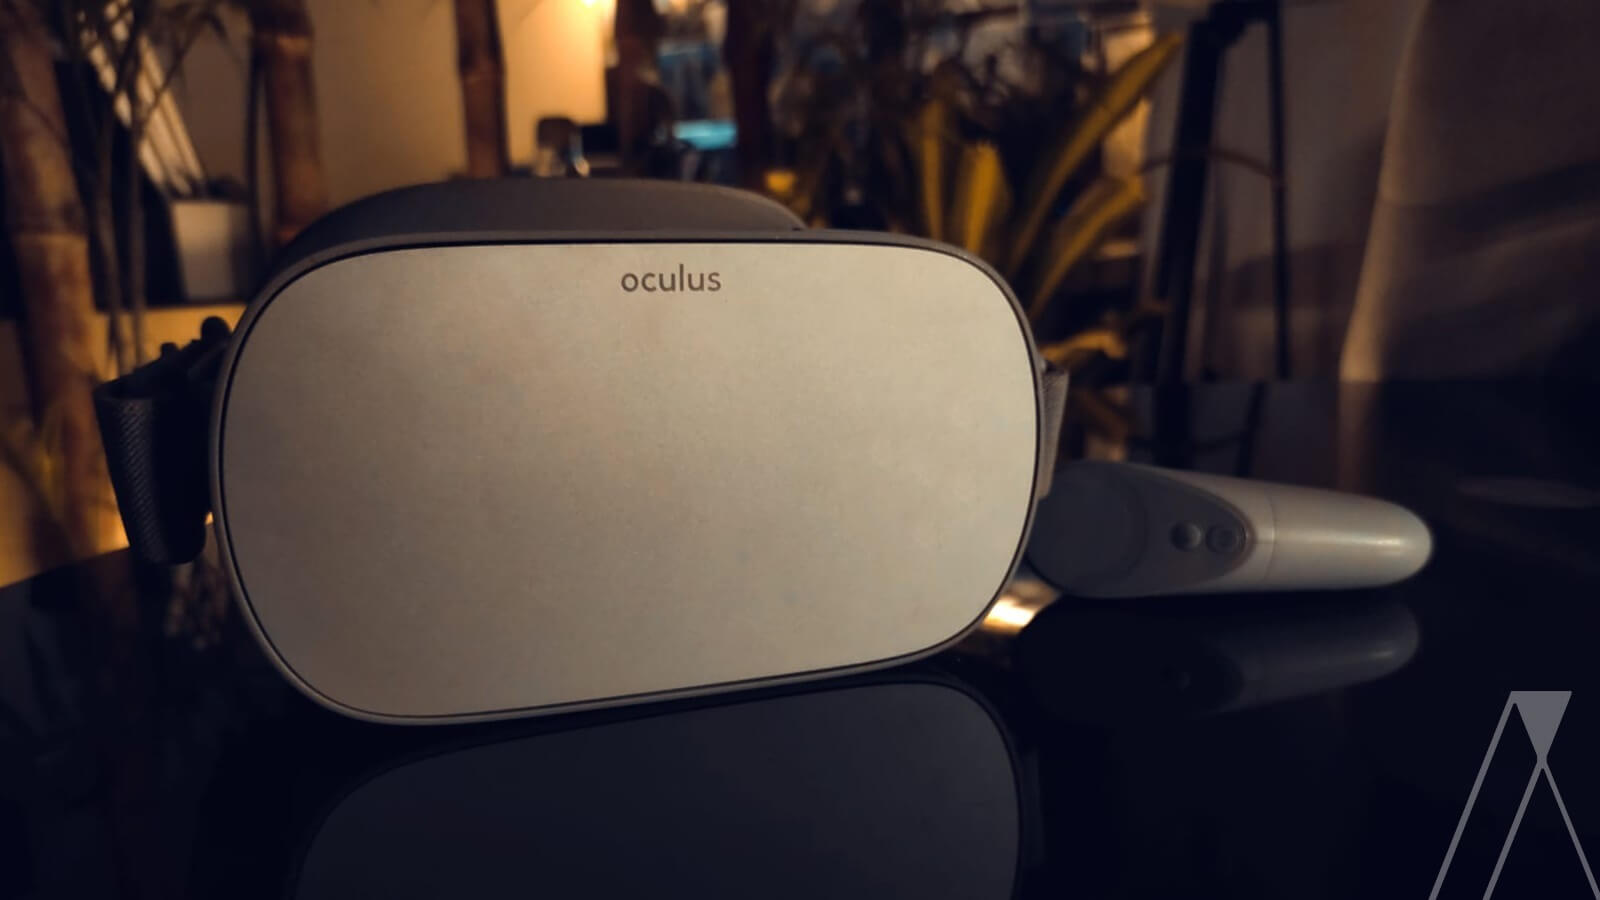 Oculus device used in Virtual Reality (VR)